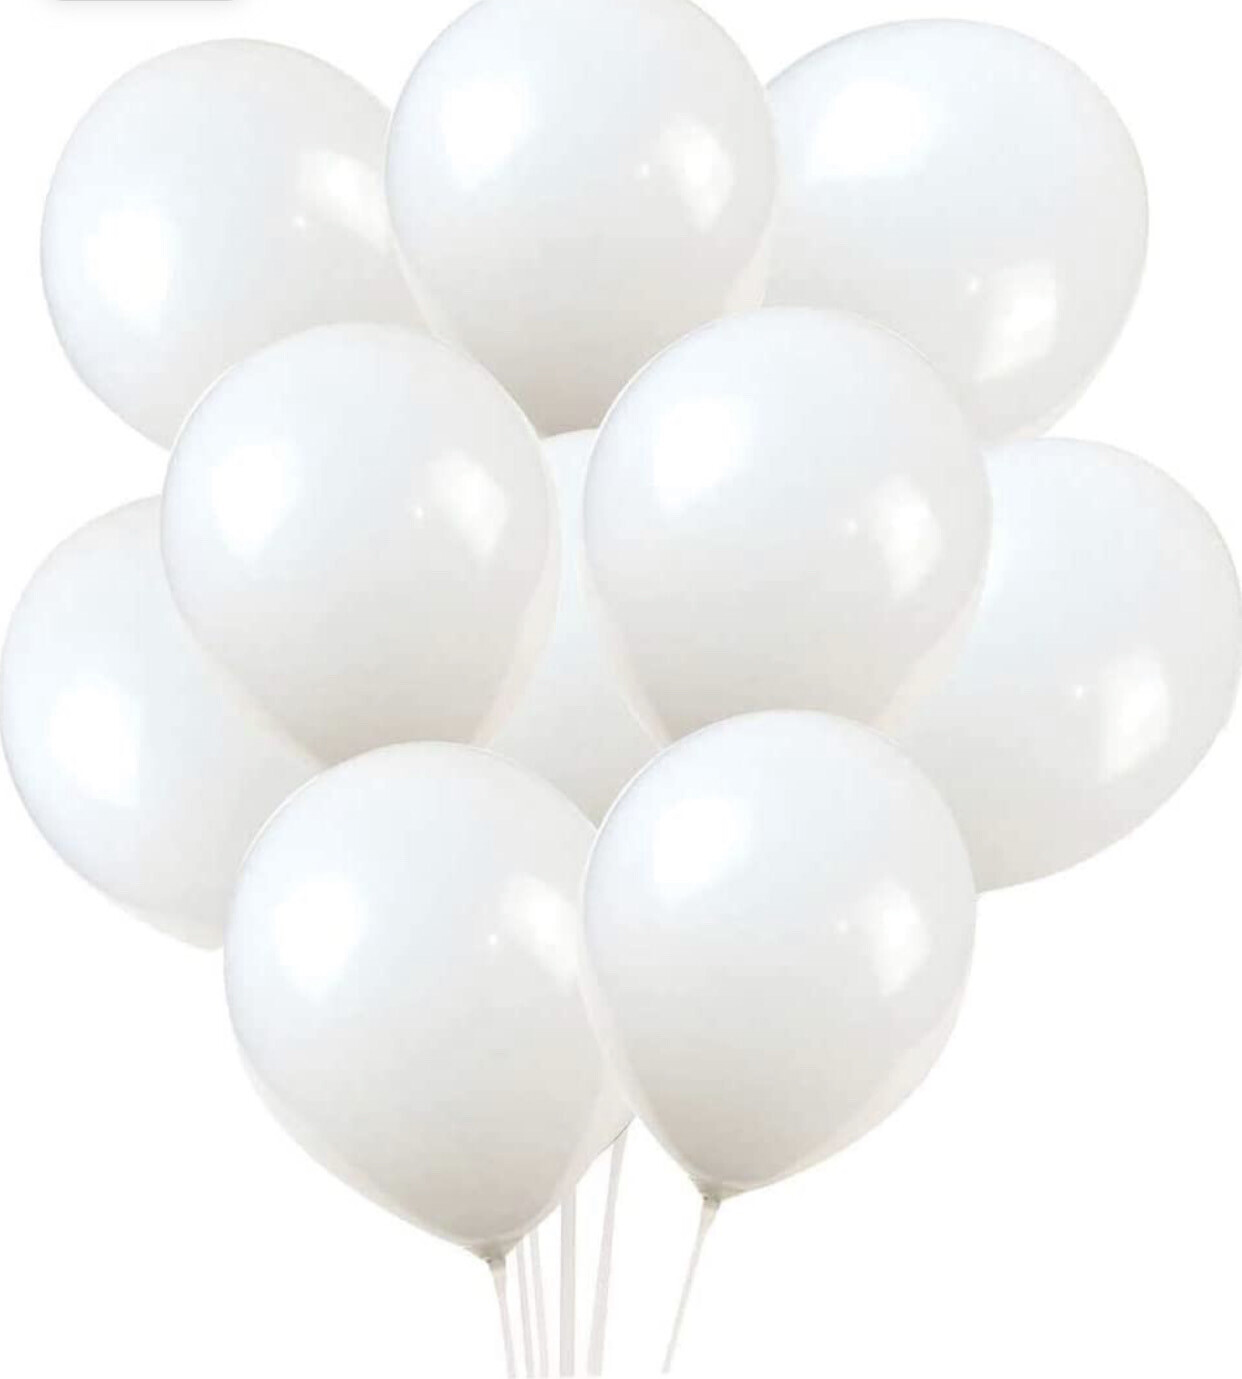 Balloons 50pcs pack White Latex Balloons for Valentine ,Wedding Graduation Baby Shower Birthday Party Decorations